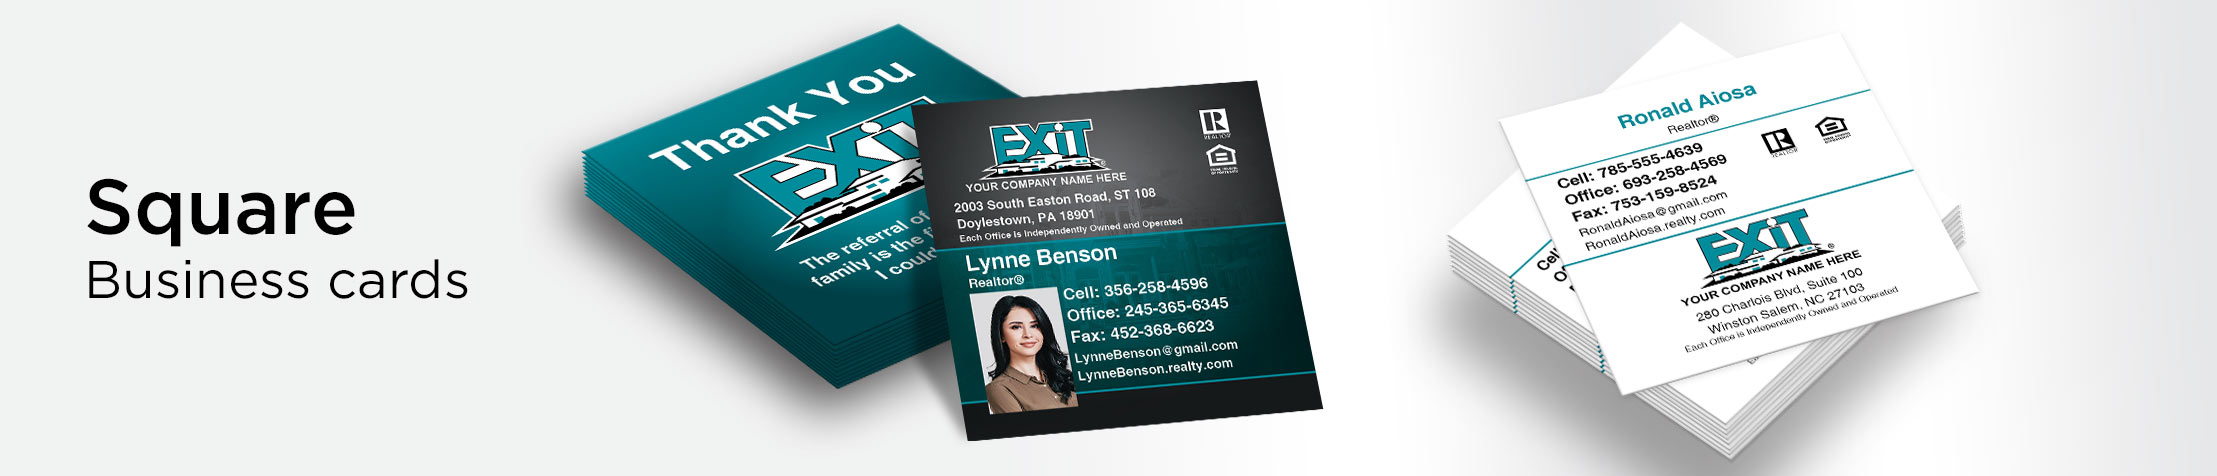 Exit Realty Square Business Cards - Exit Realty Approved Vendor - Modern, Unique Business Cards for Realtors with a Glossy or Matte Finish | BestPrintBuy.com